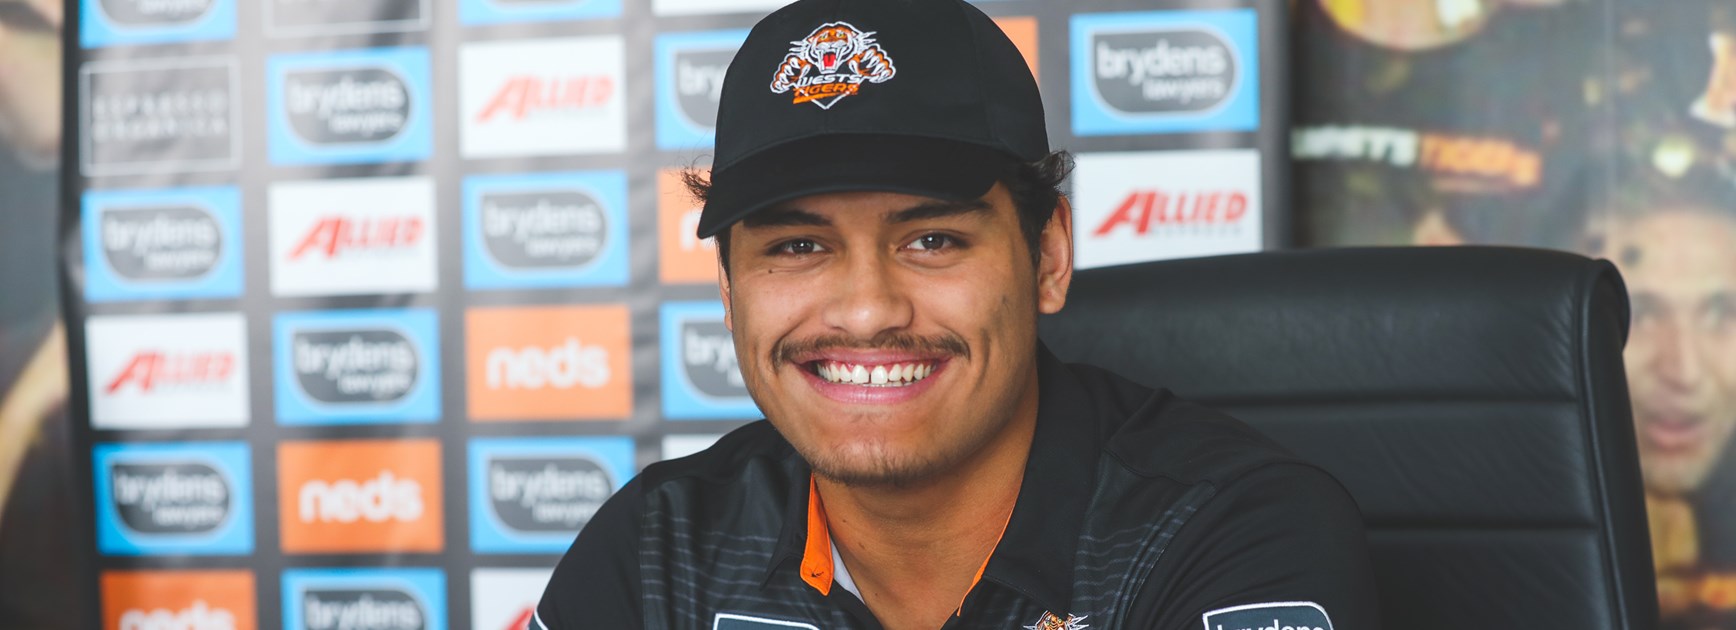 Wests Tigers forward Shawn Blore